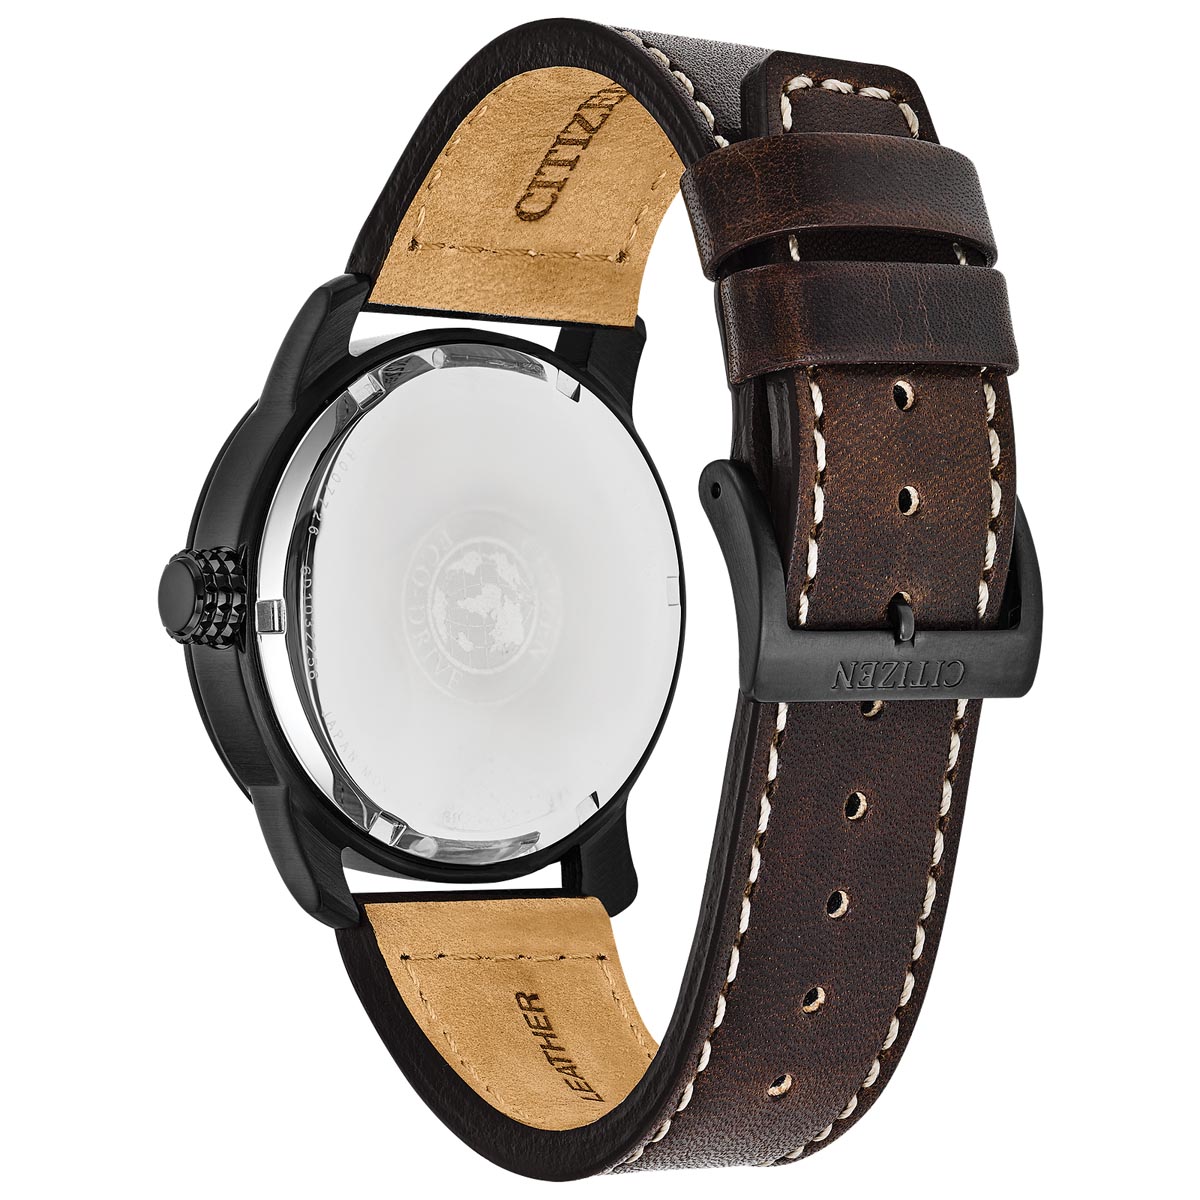 Citizen Garrison Mens Watch with Navy Dial and Brown Leather Strap (eco drive movement)